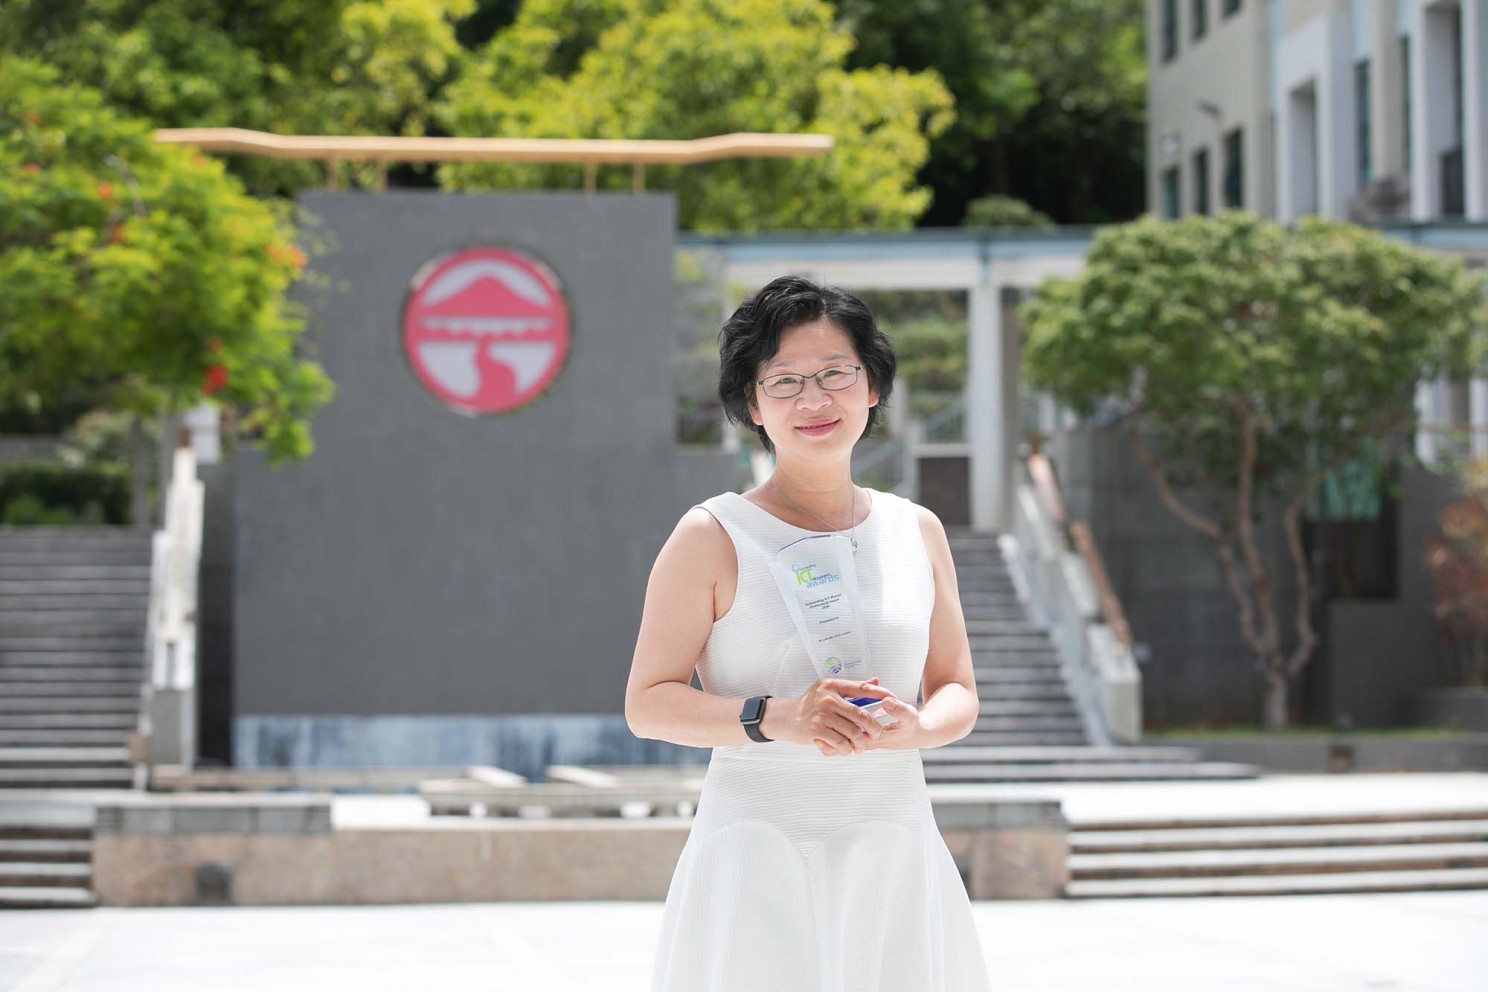 Breaking the glass ceiling – how Outstanding ICT Women Professional Award winner Dr Louisa Lam heads the digital transformation at Lingnan